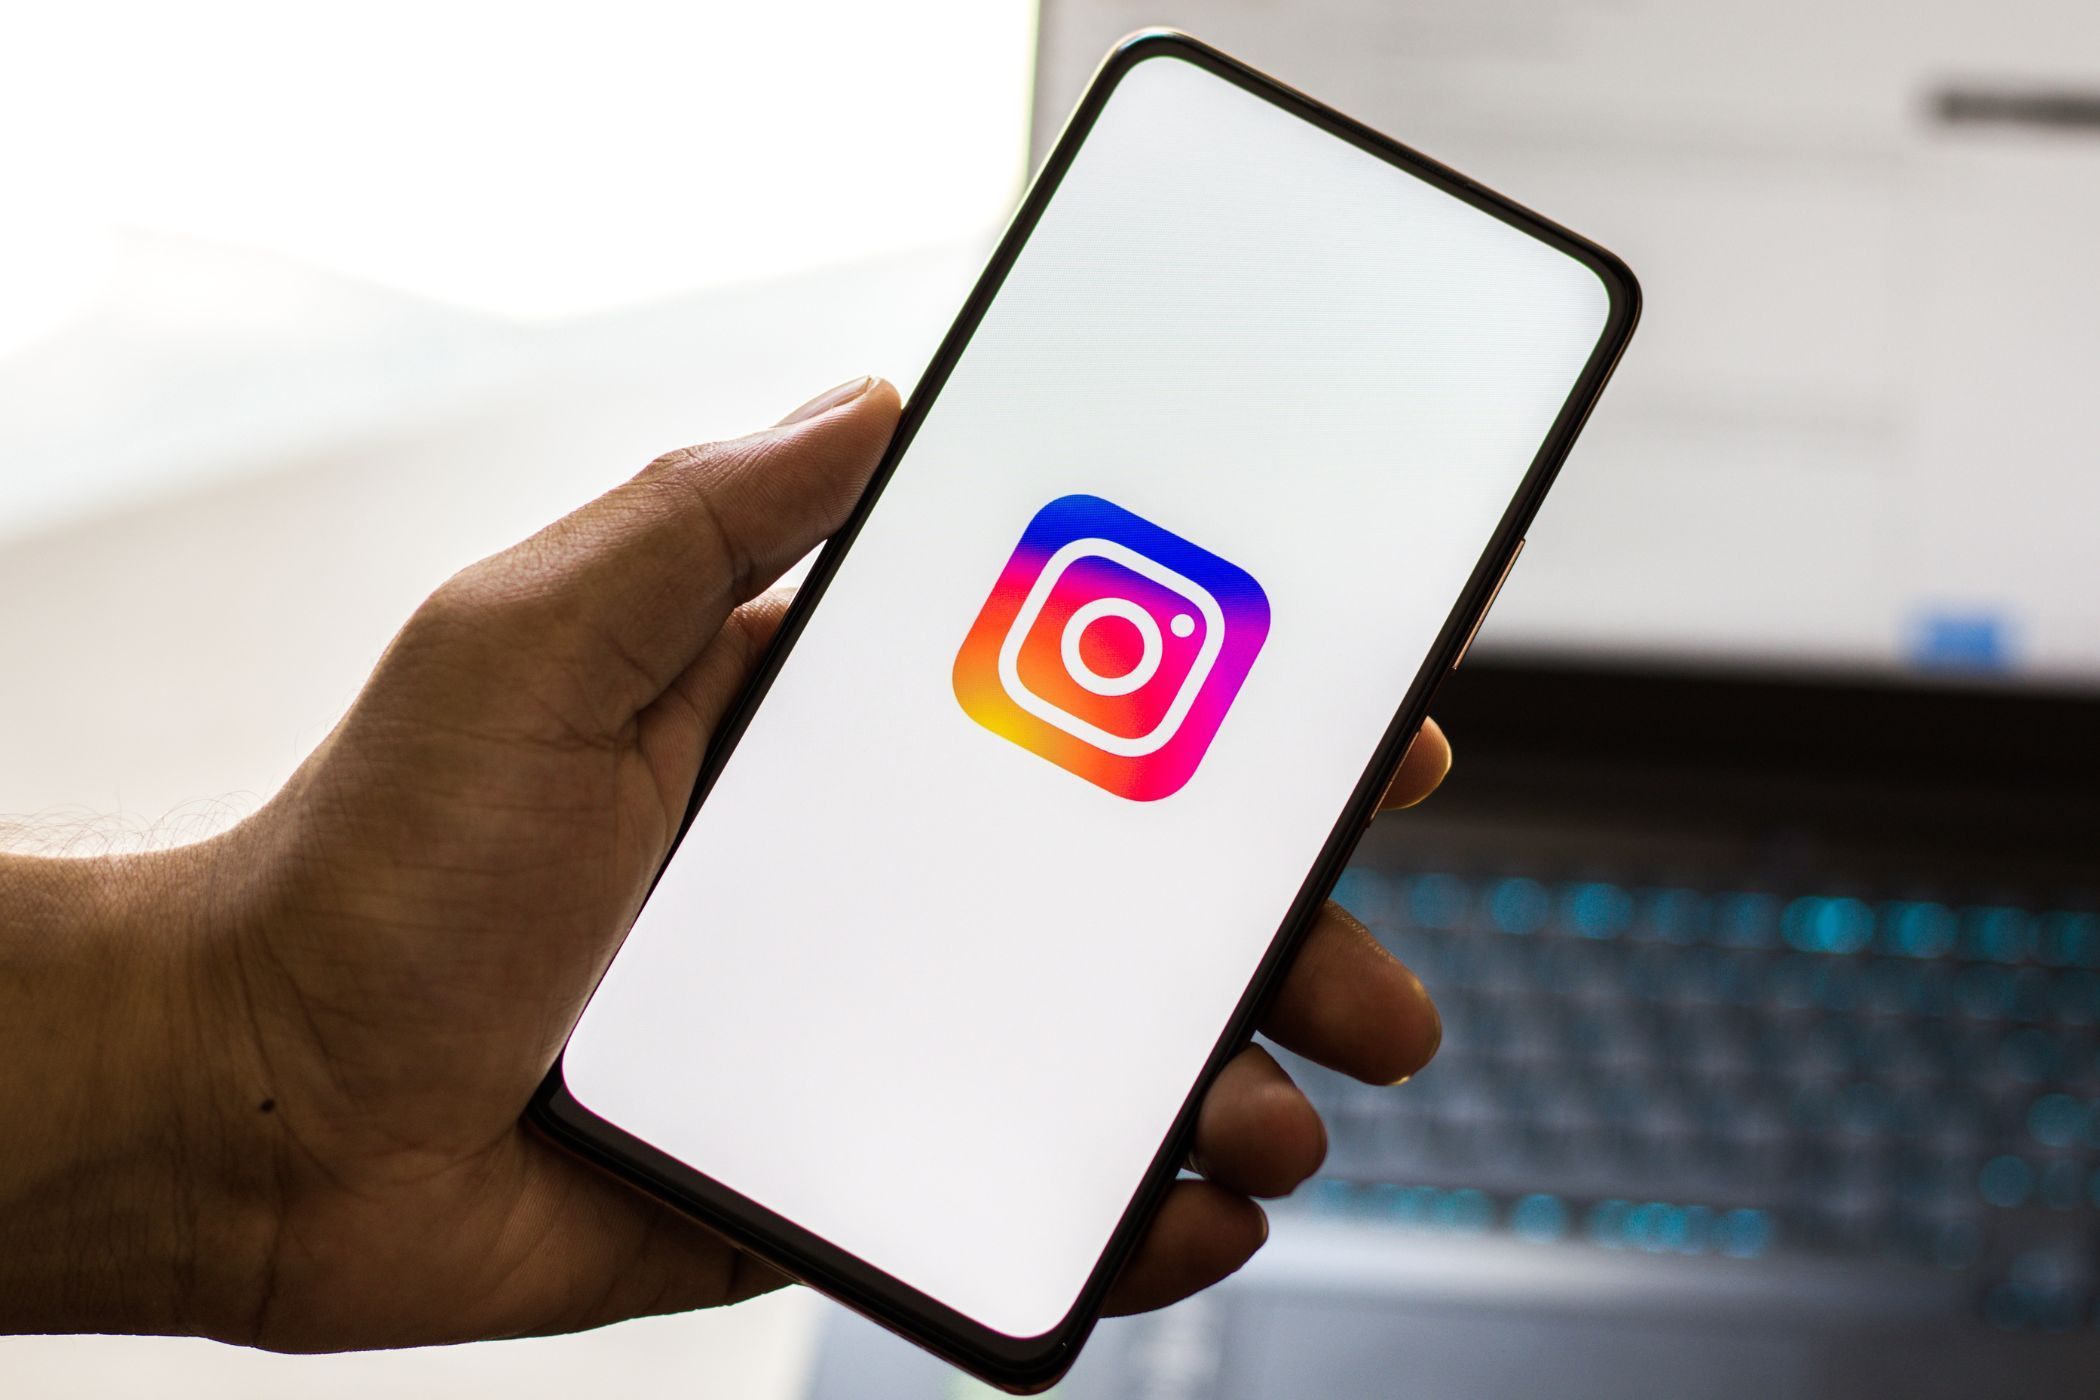 the instagram logo on a smartphone